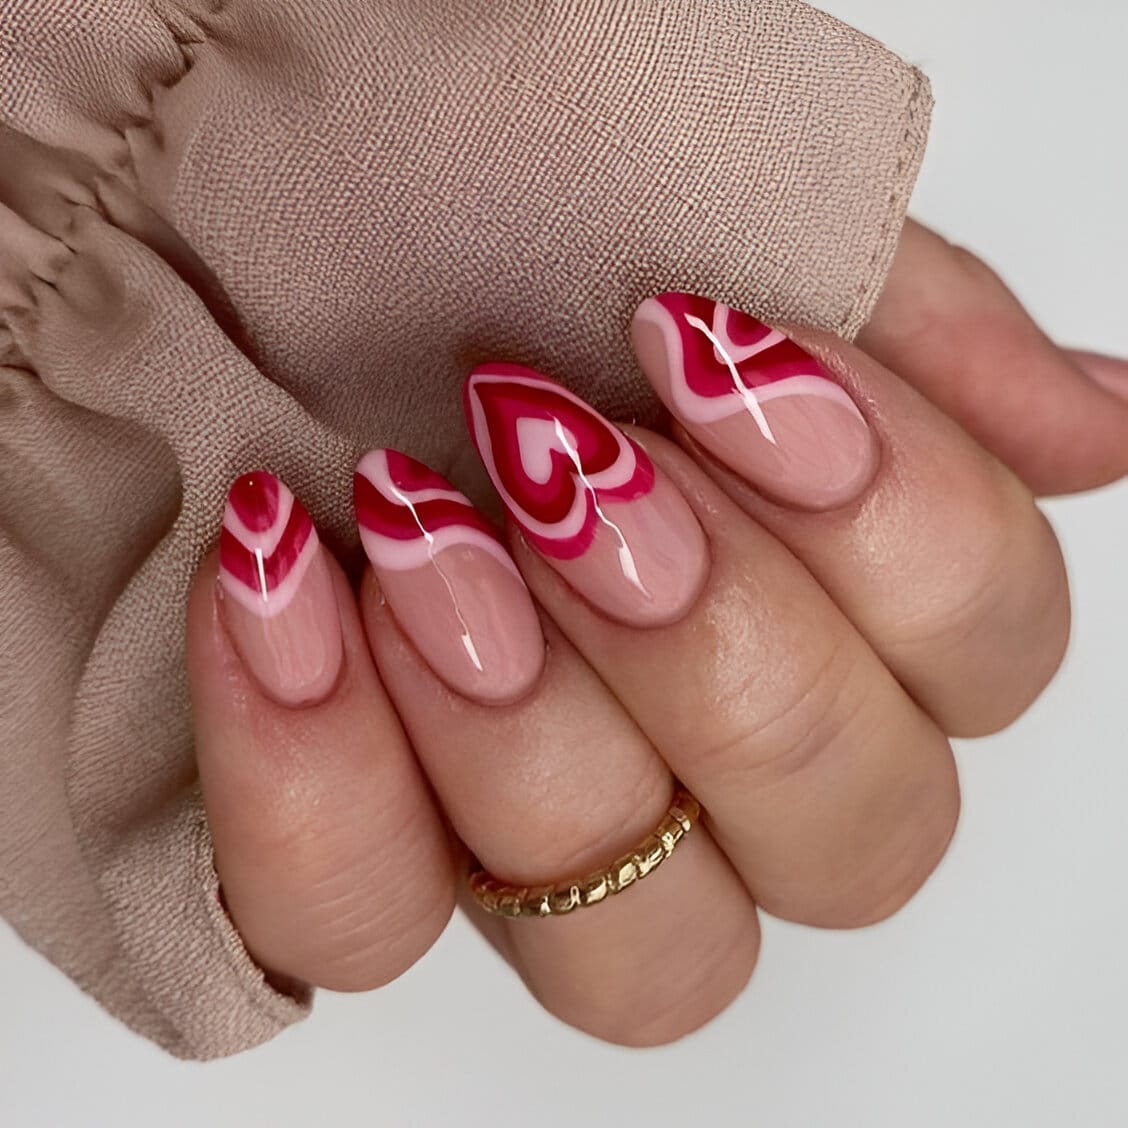 30 Irresistible Red Heart Nails For The Perfect Romantic Date 11